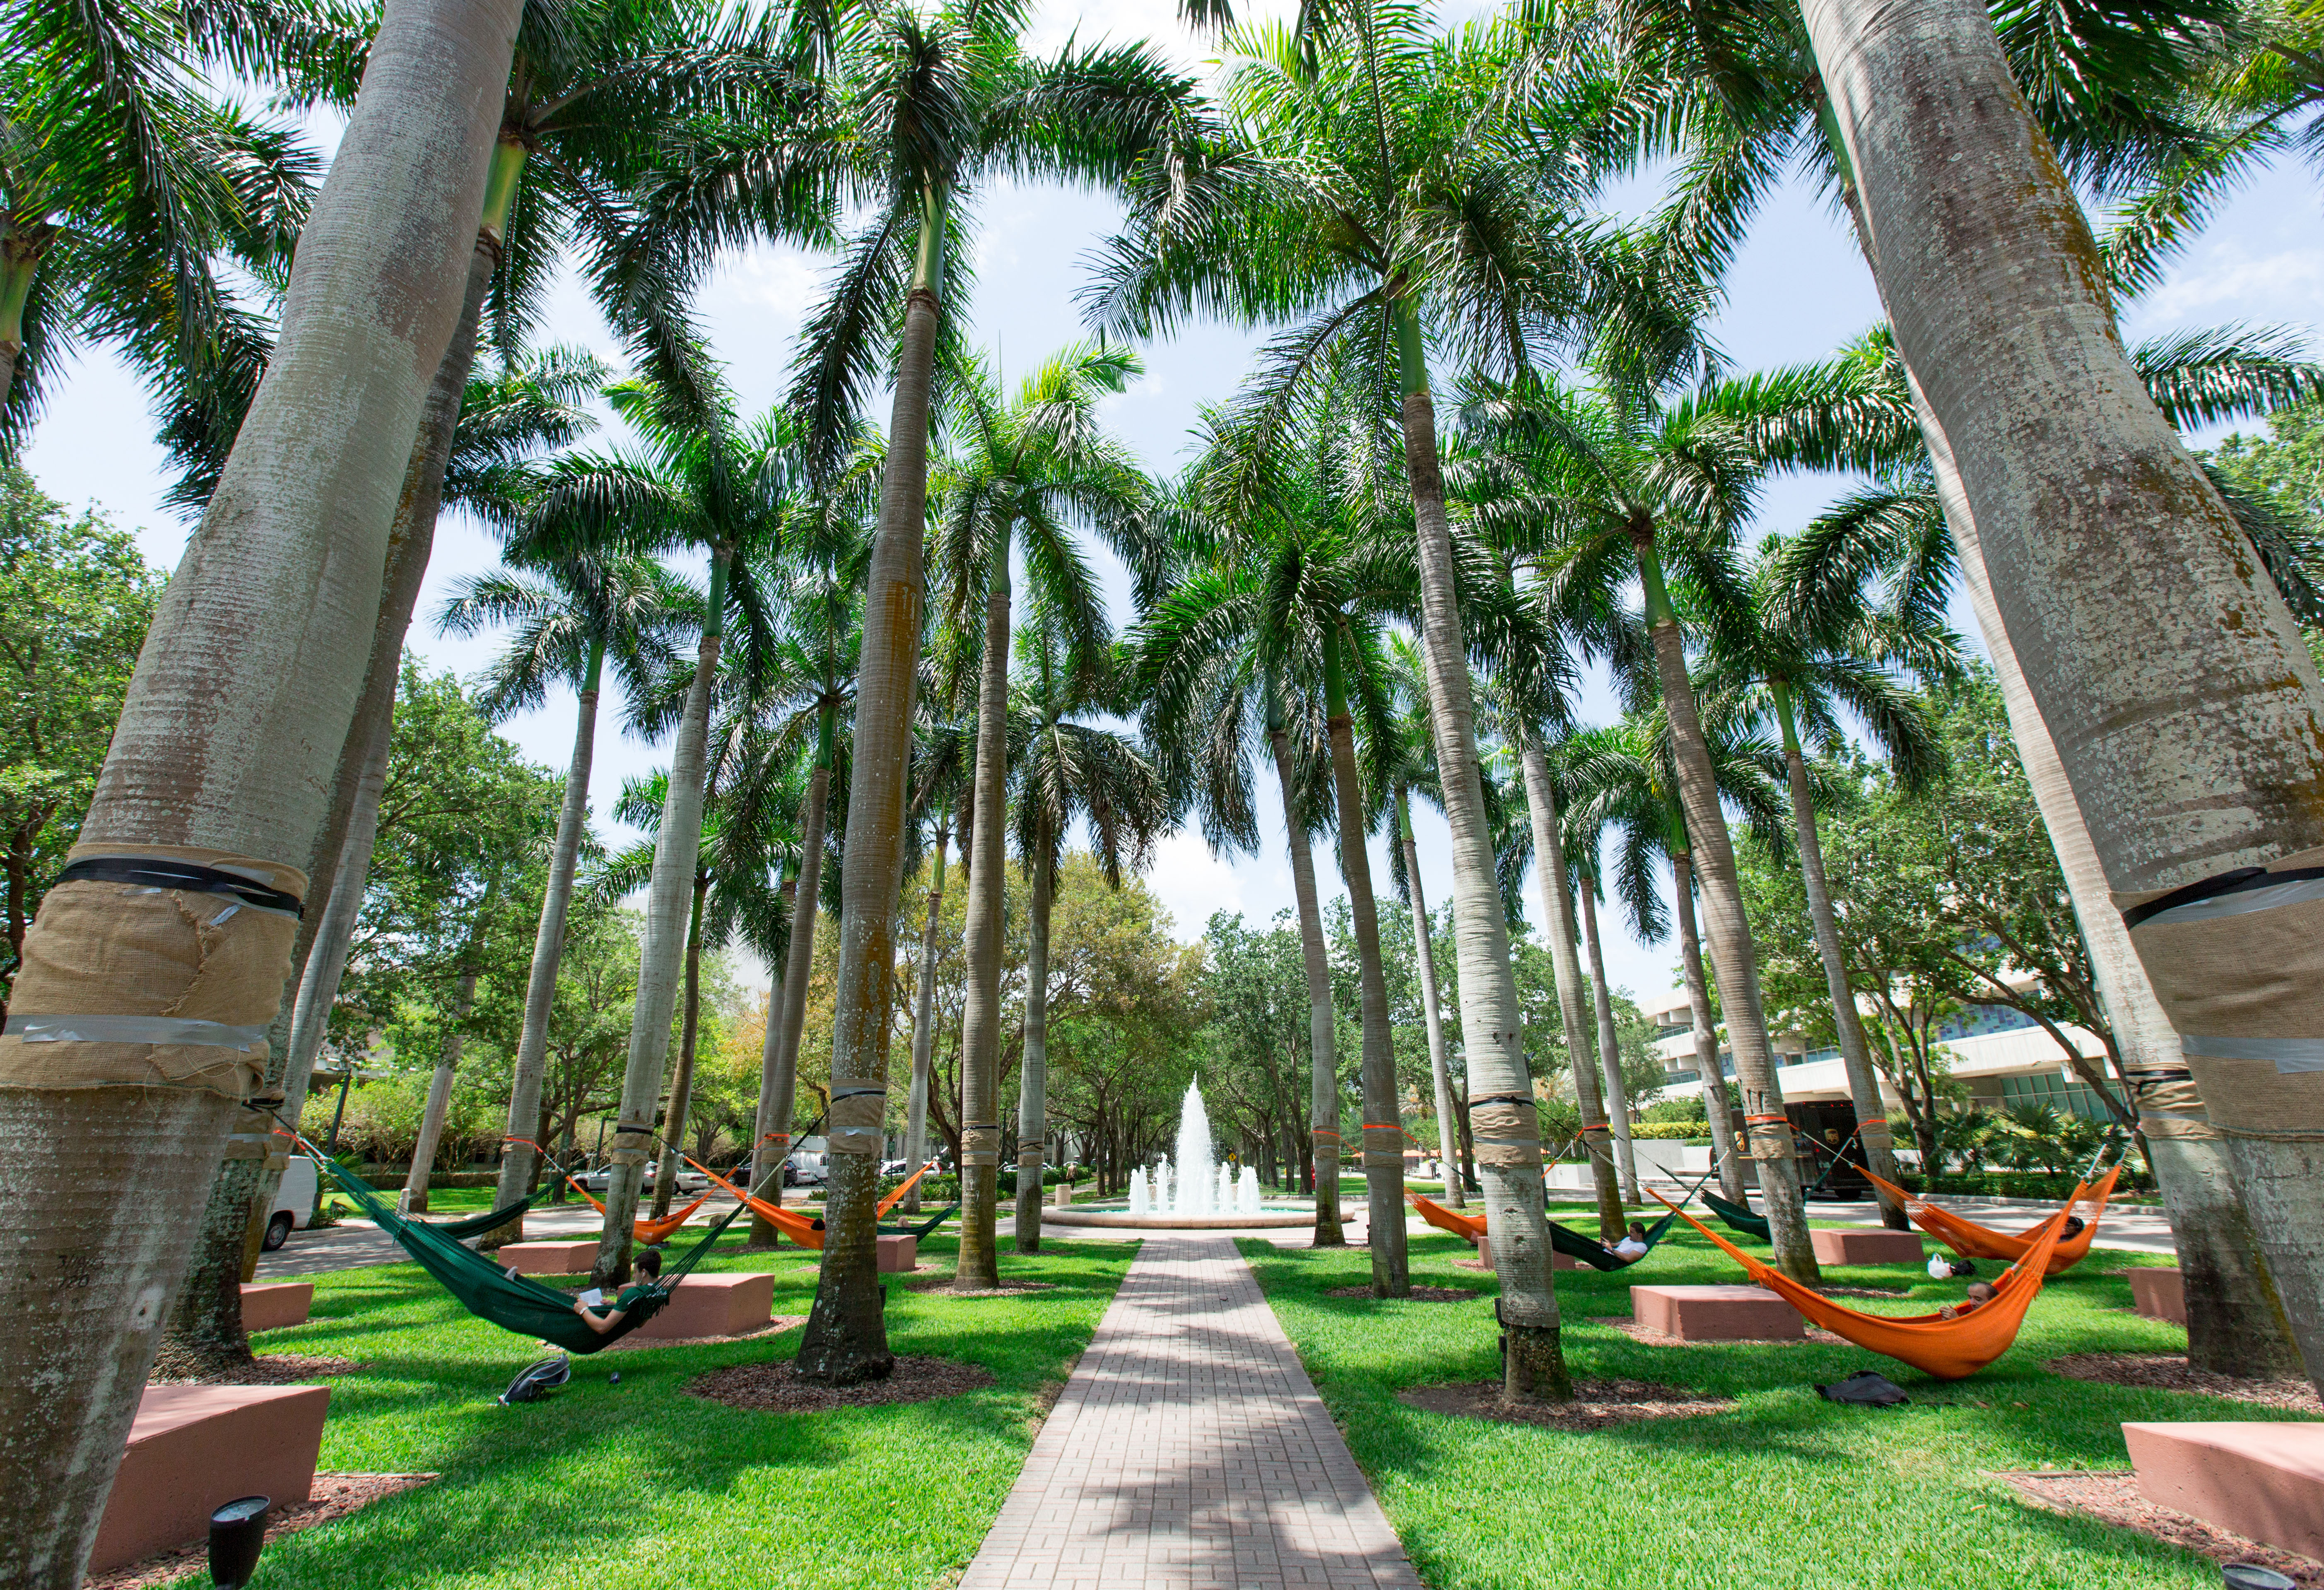 Students reading and relaxing on orange and green hammocks tied to palm trees, fountain in the background.